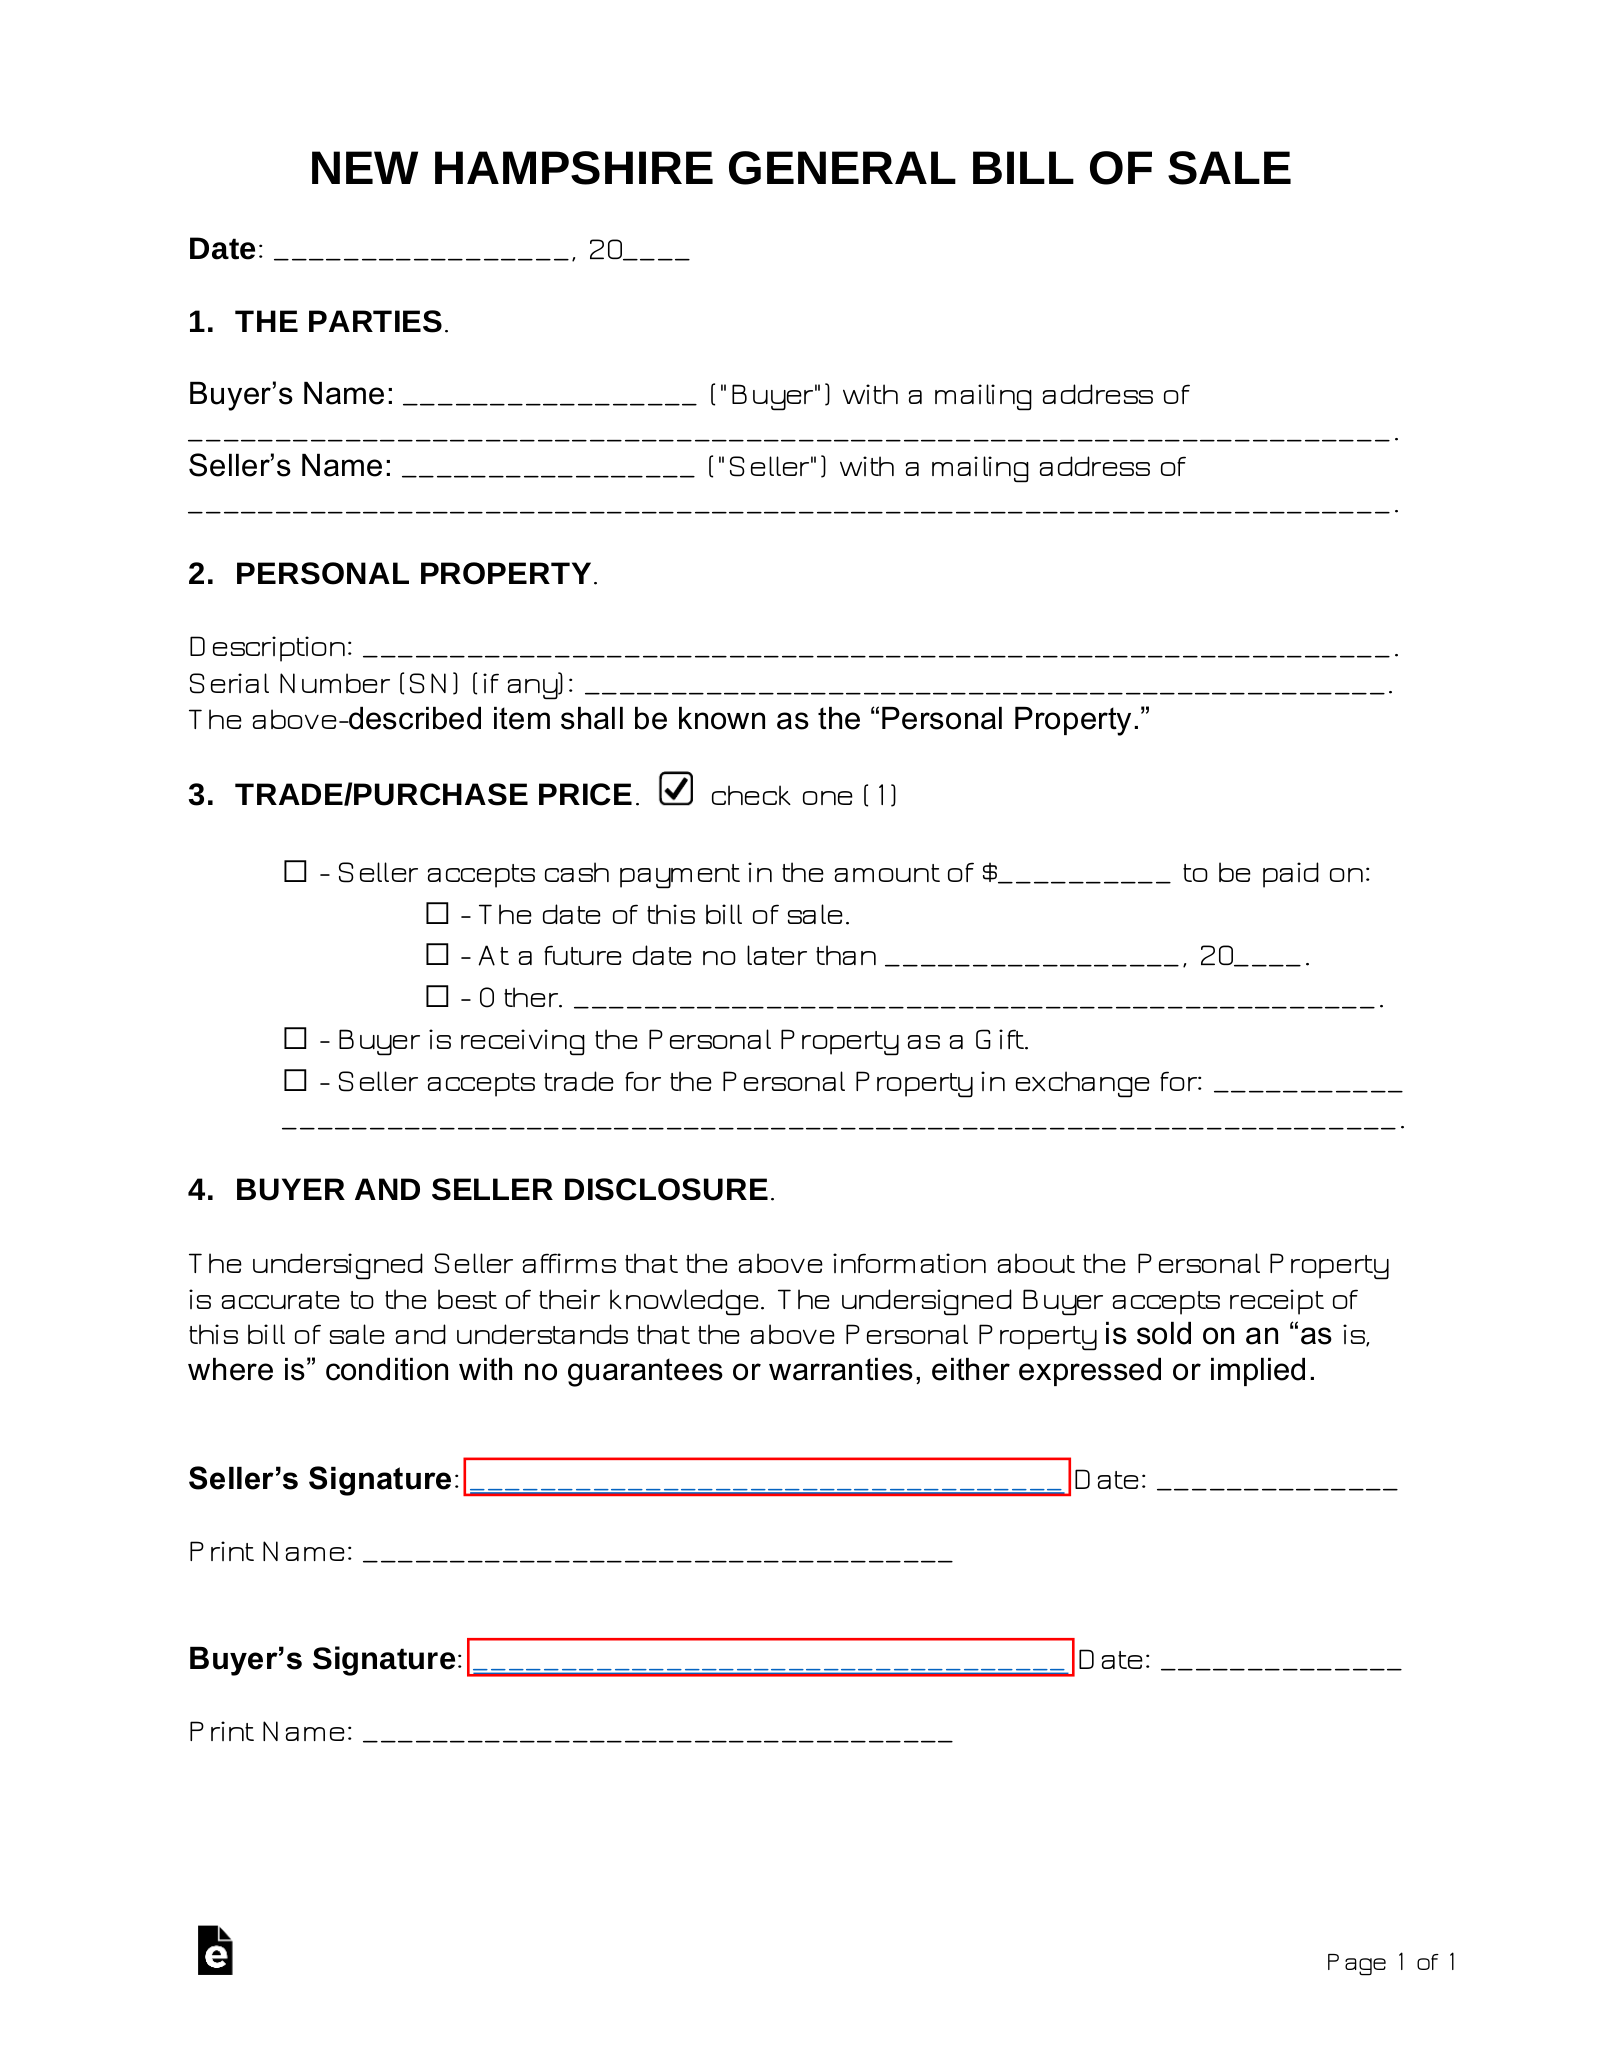 free-new-hampshire-general-bill-of-sale-form-pdf-word-eforms